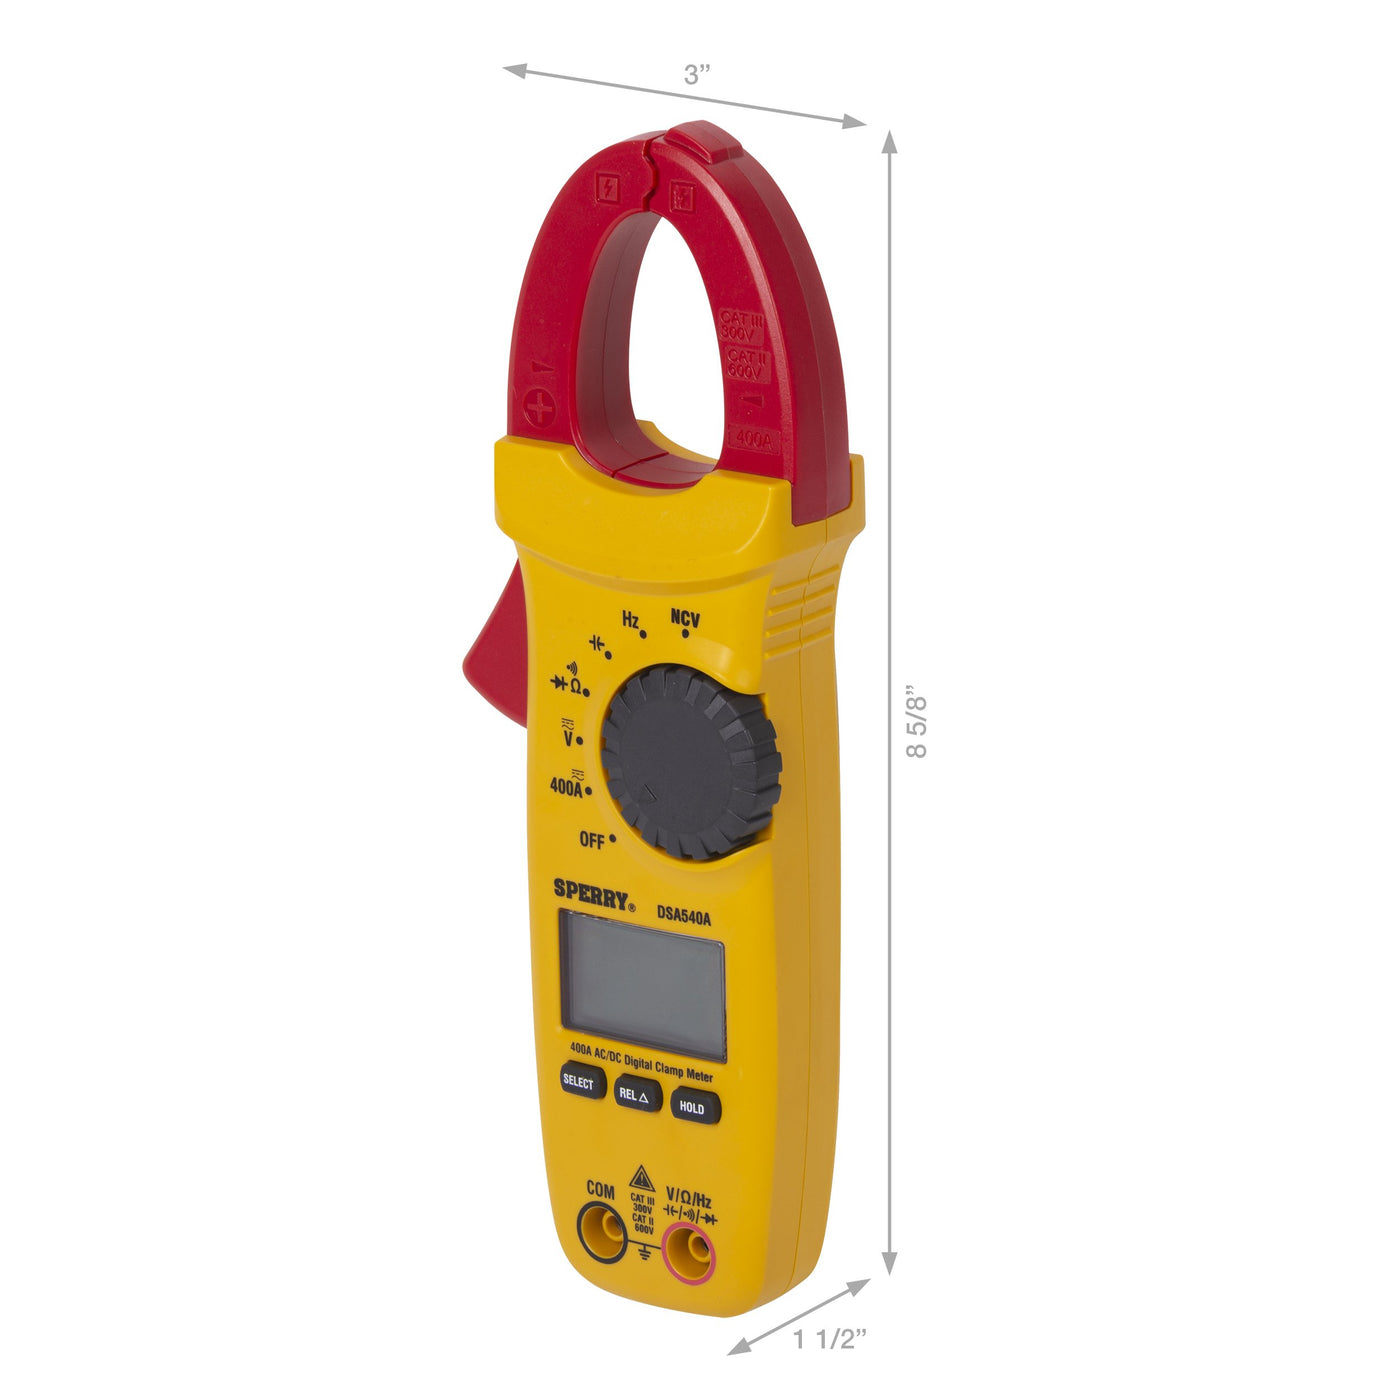 Sperry Instruments DSA540A Digital Clamp Meter, 400A AC/DC